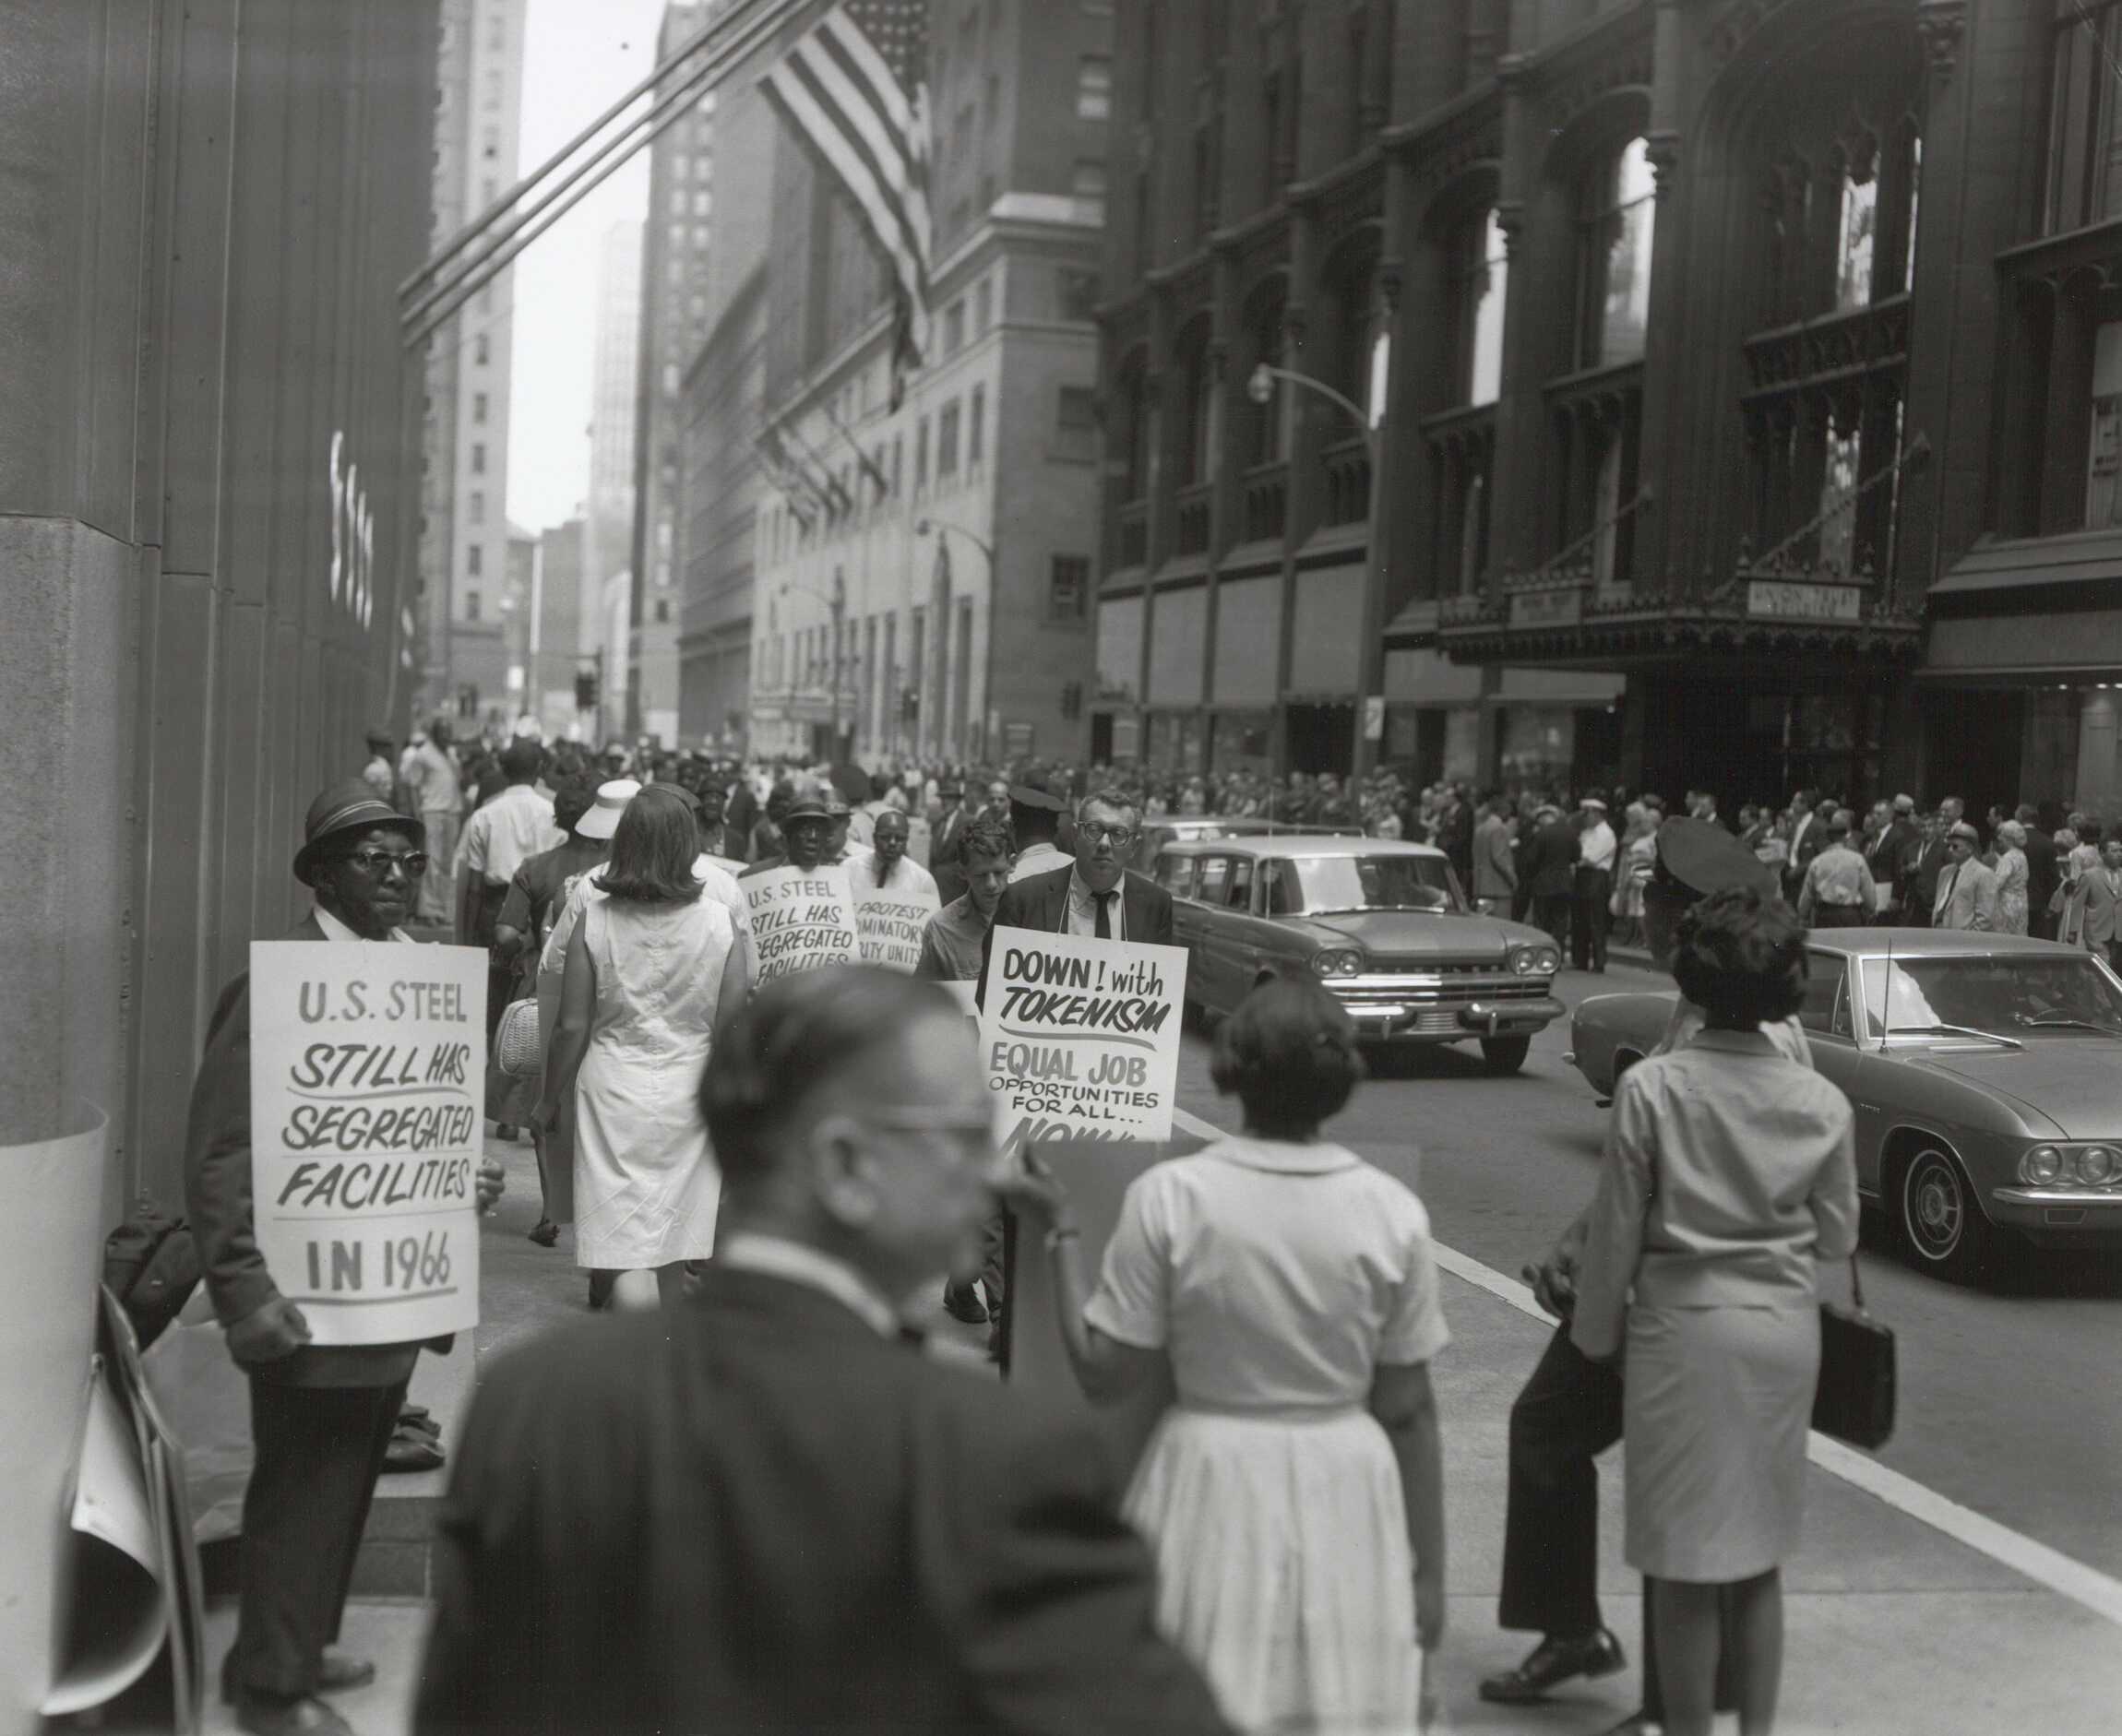 A black and white photograph of NAACP activists protesting segregated work spaces at U.S. Steel.